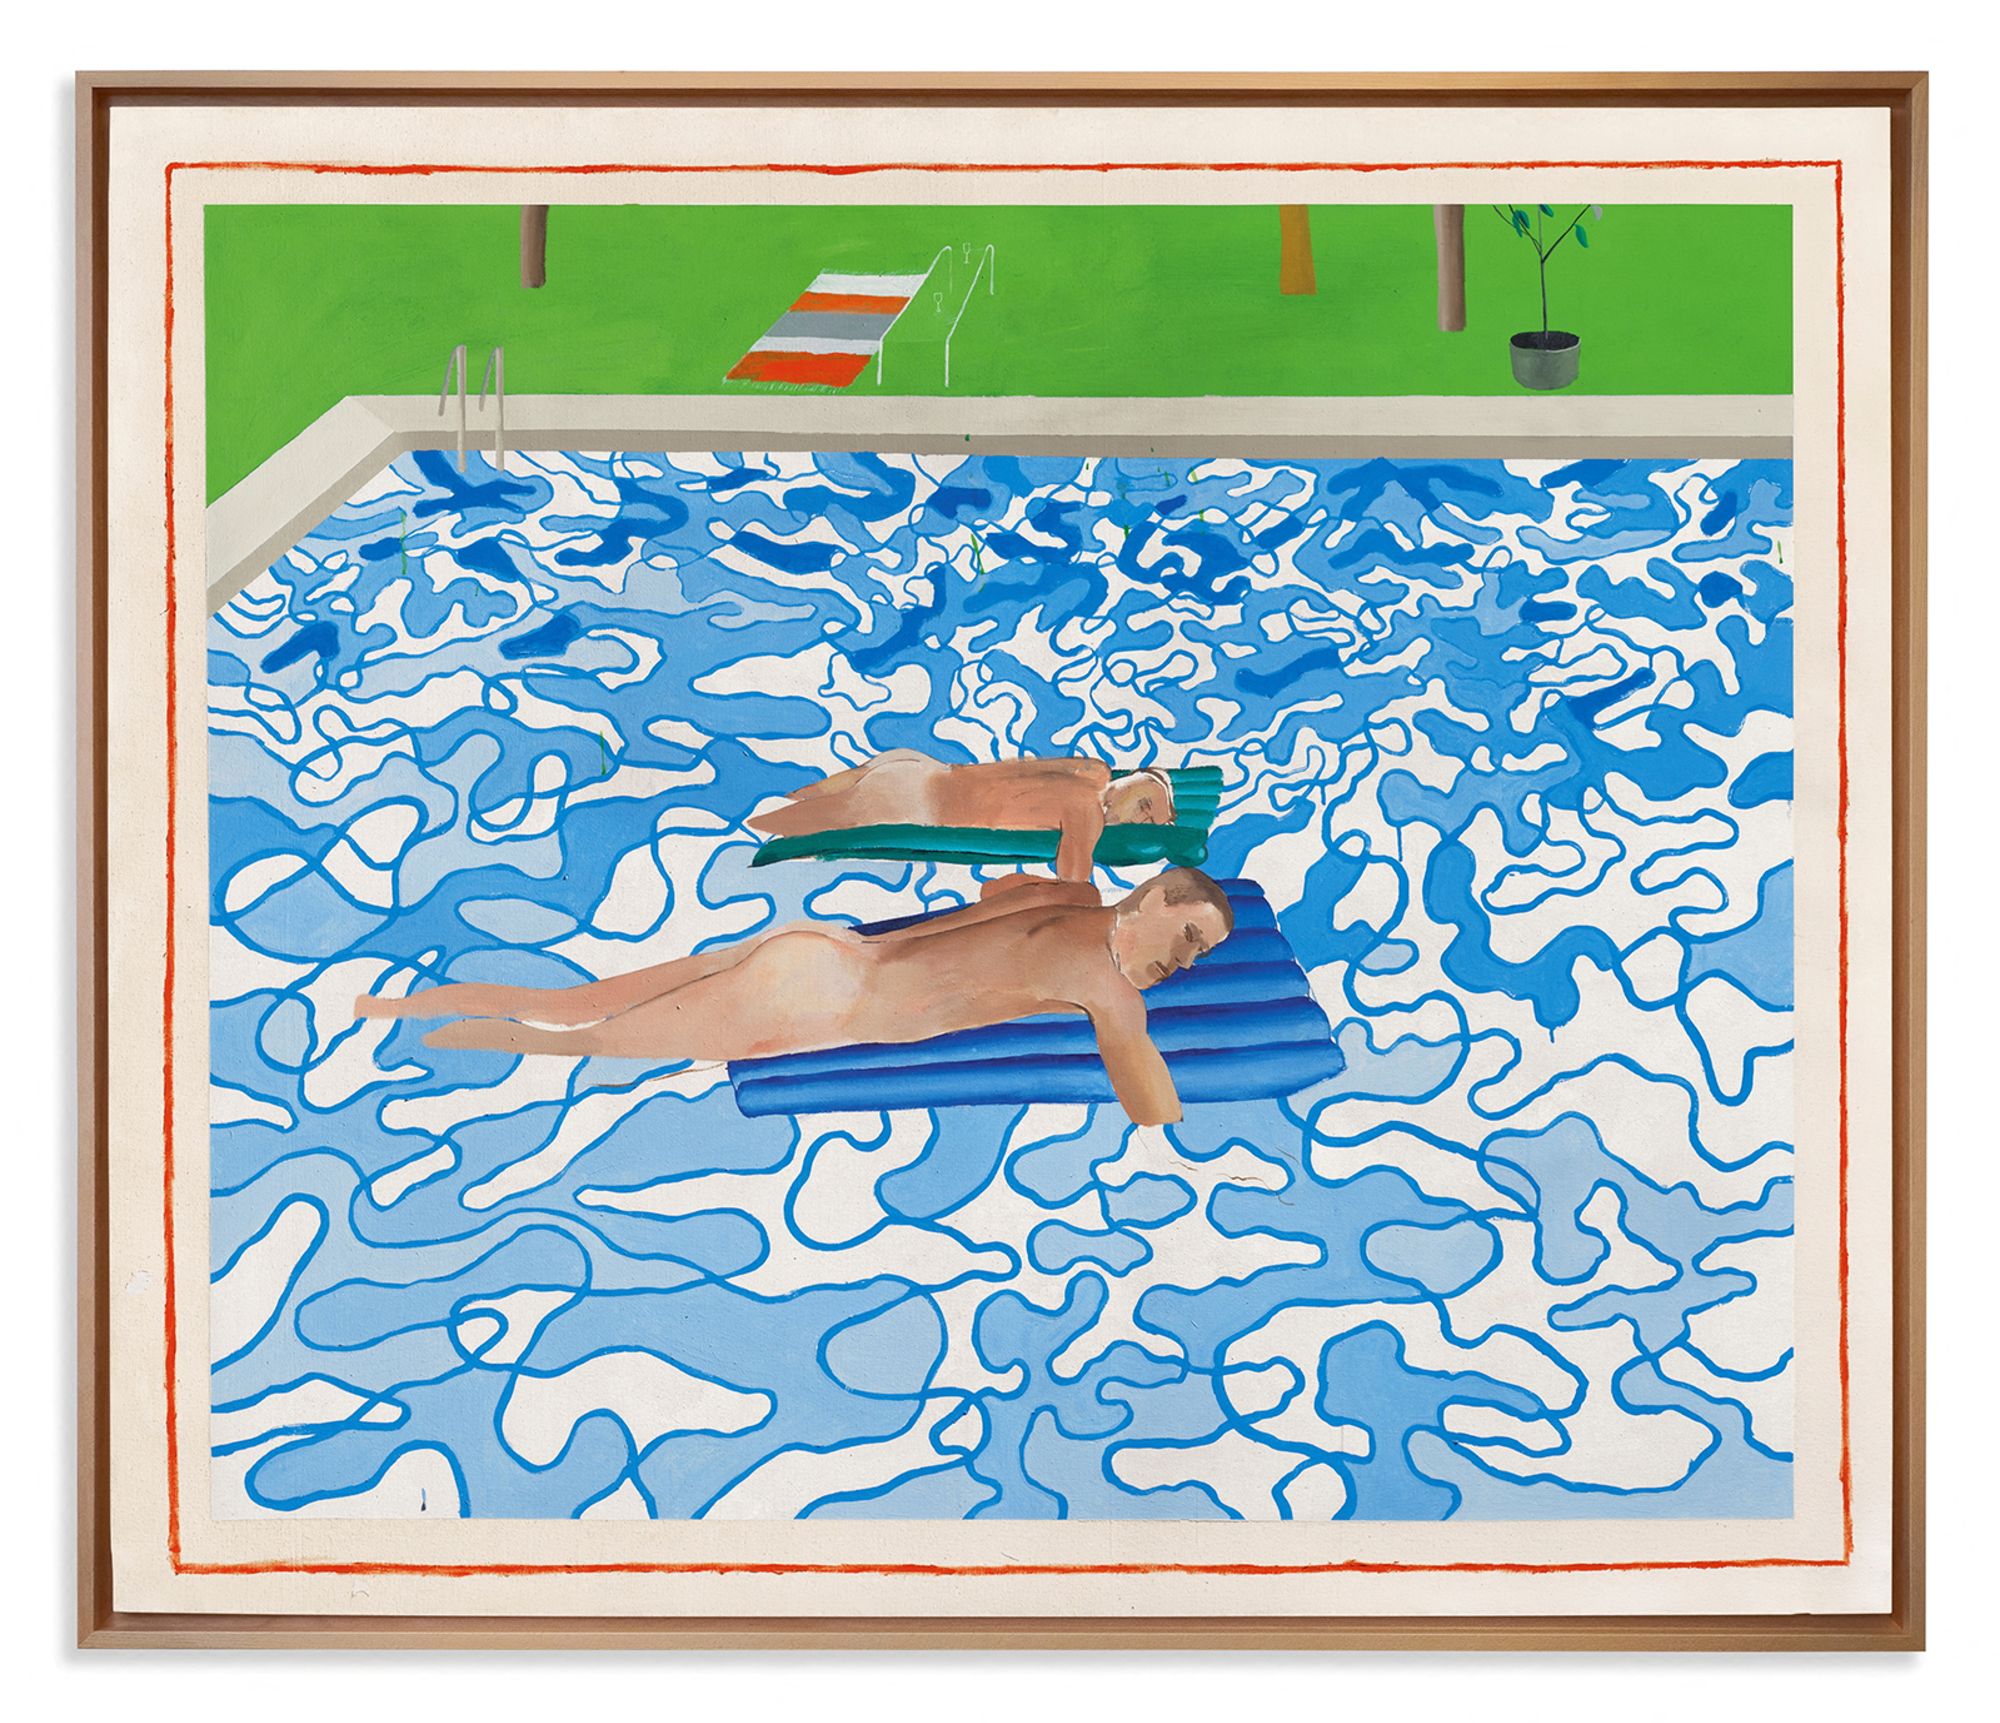 David Hockney's 1965 "California" painting, which is being offered for sale at auction house Christie's "20th/21st Century: London Evening Sale" on March 7, 2024 in London, Britain, is displayed in this undated handout photo obtained on January 25, 2024.